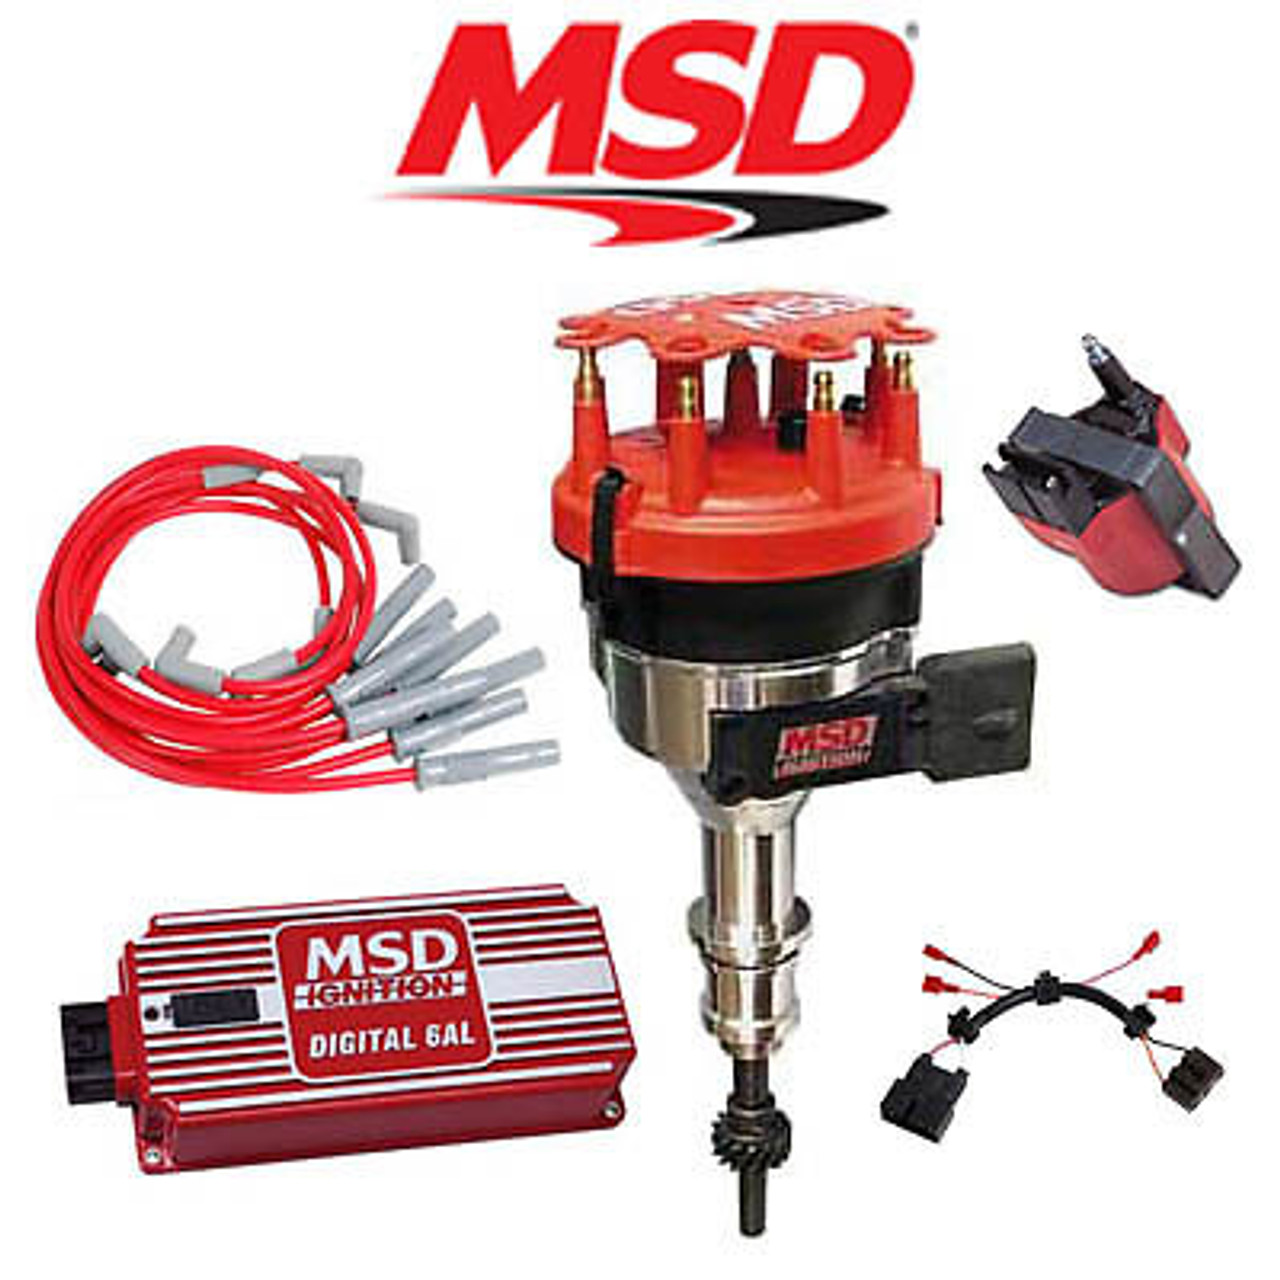 MSD Ignition Kit - Digital 6AL/Distributor/Wires/Coil/Harness 86-93 Ford Mustang